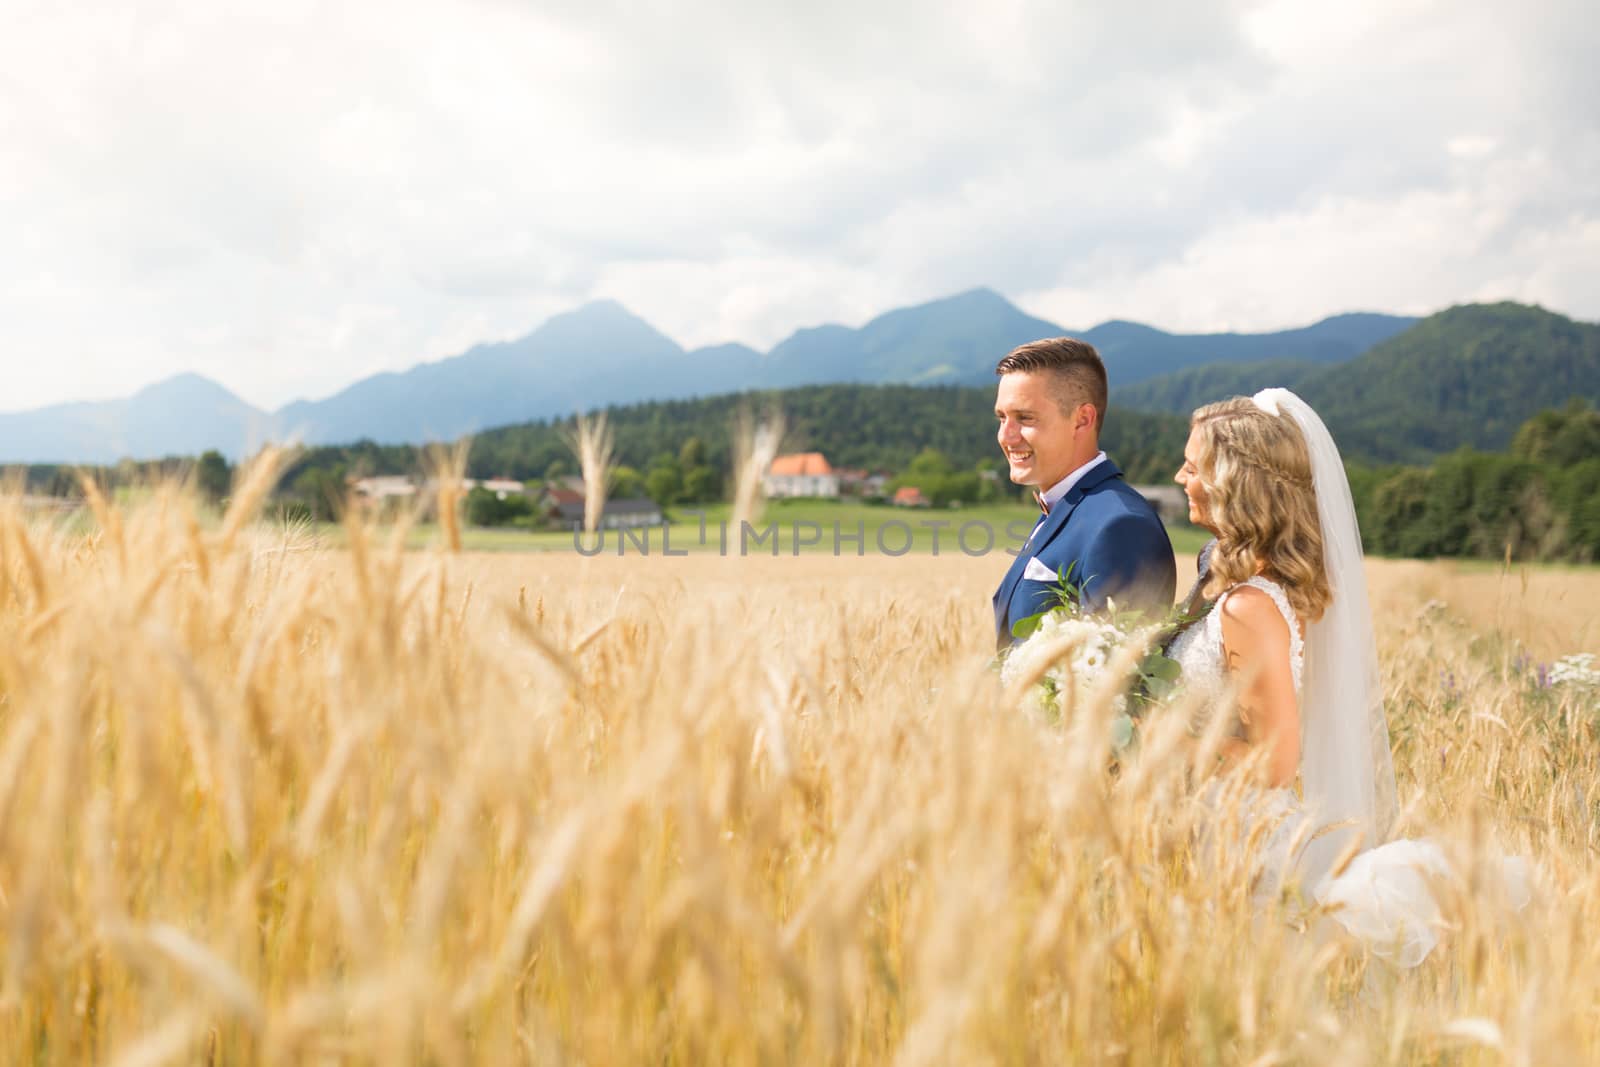 Bride hugs groom tenderly in wheat field somewhere in Slovenian countryside. Caucasian happy romantic young couple celebrating their marriage.